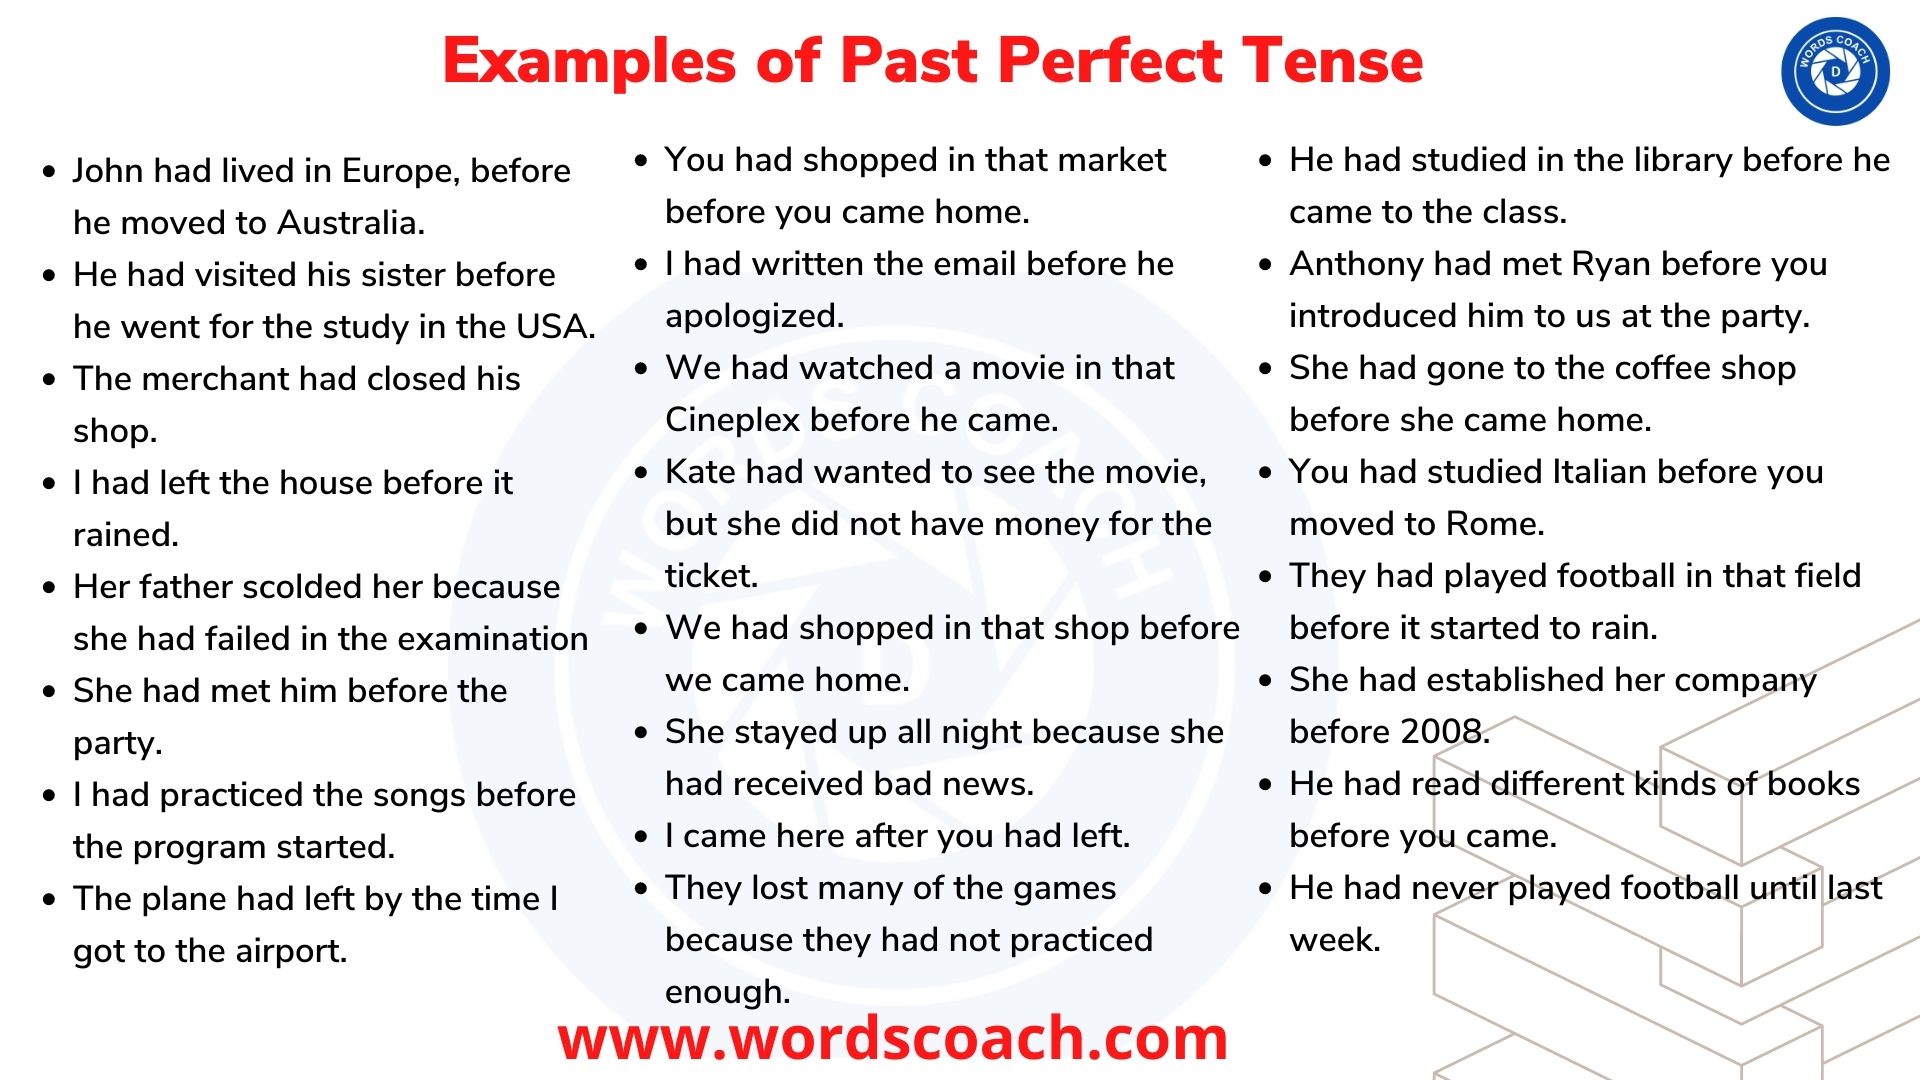 Examples of Past Perfect Tense Sentences